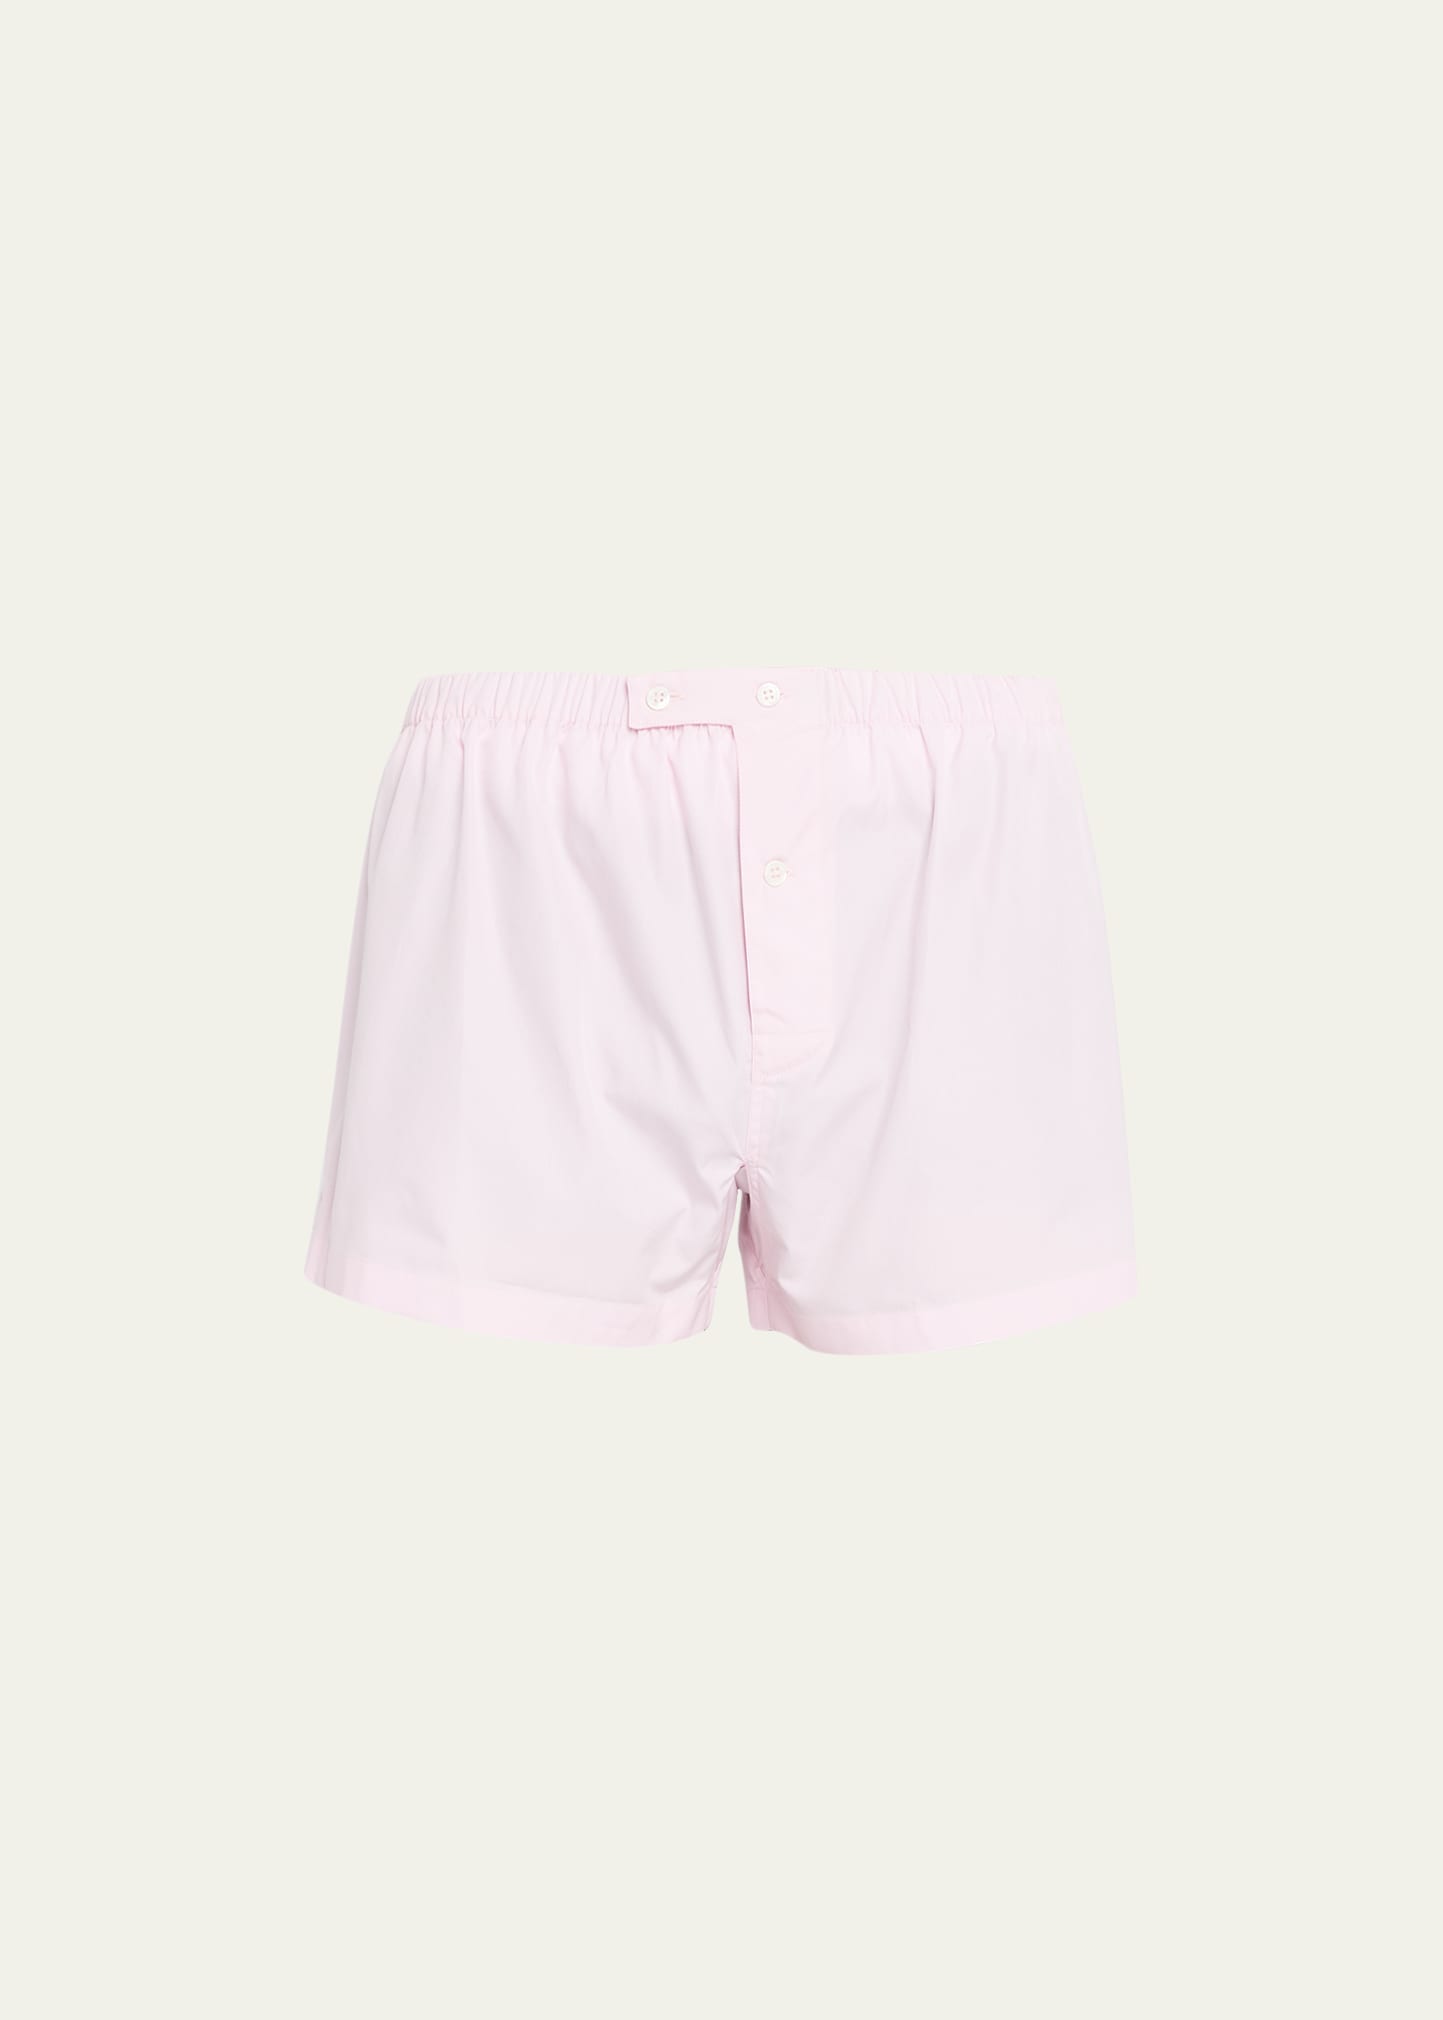 Anderson & Sheppard Men's George Cortina Organic Cotton Pajama Shorts In Lt Pink